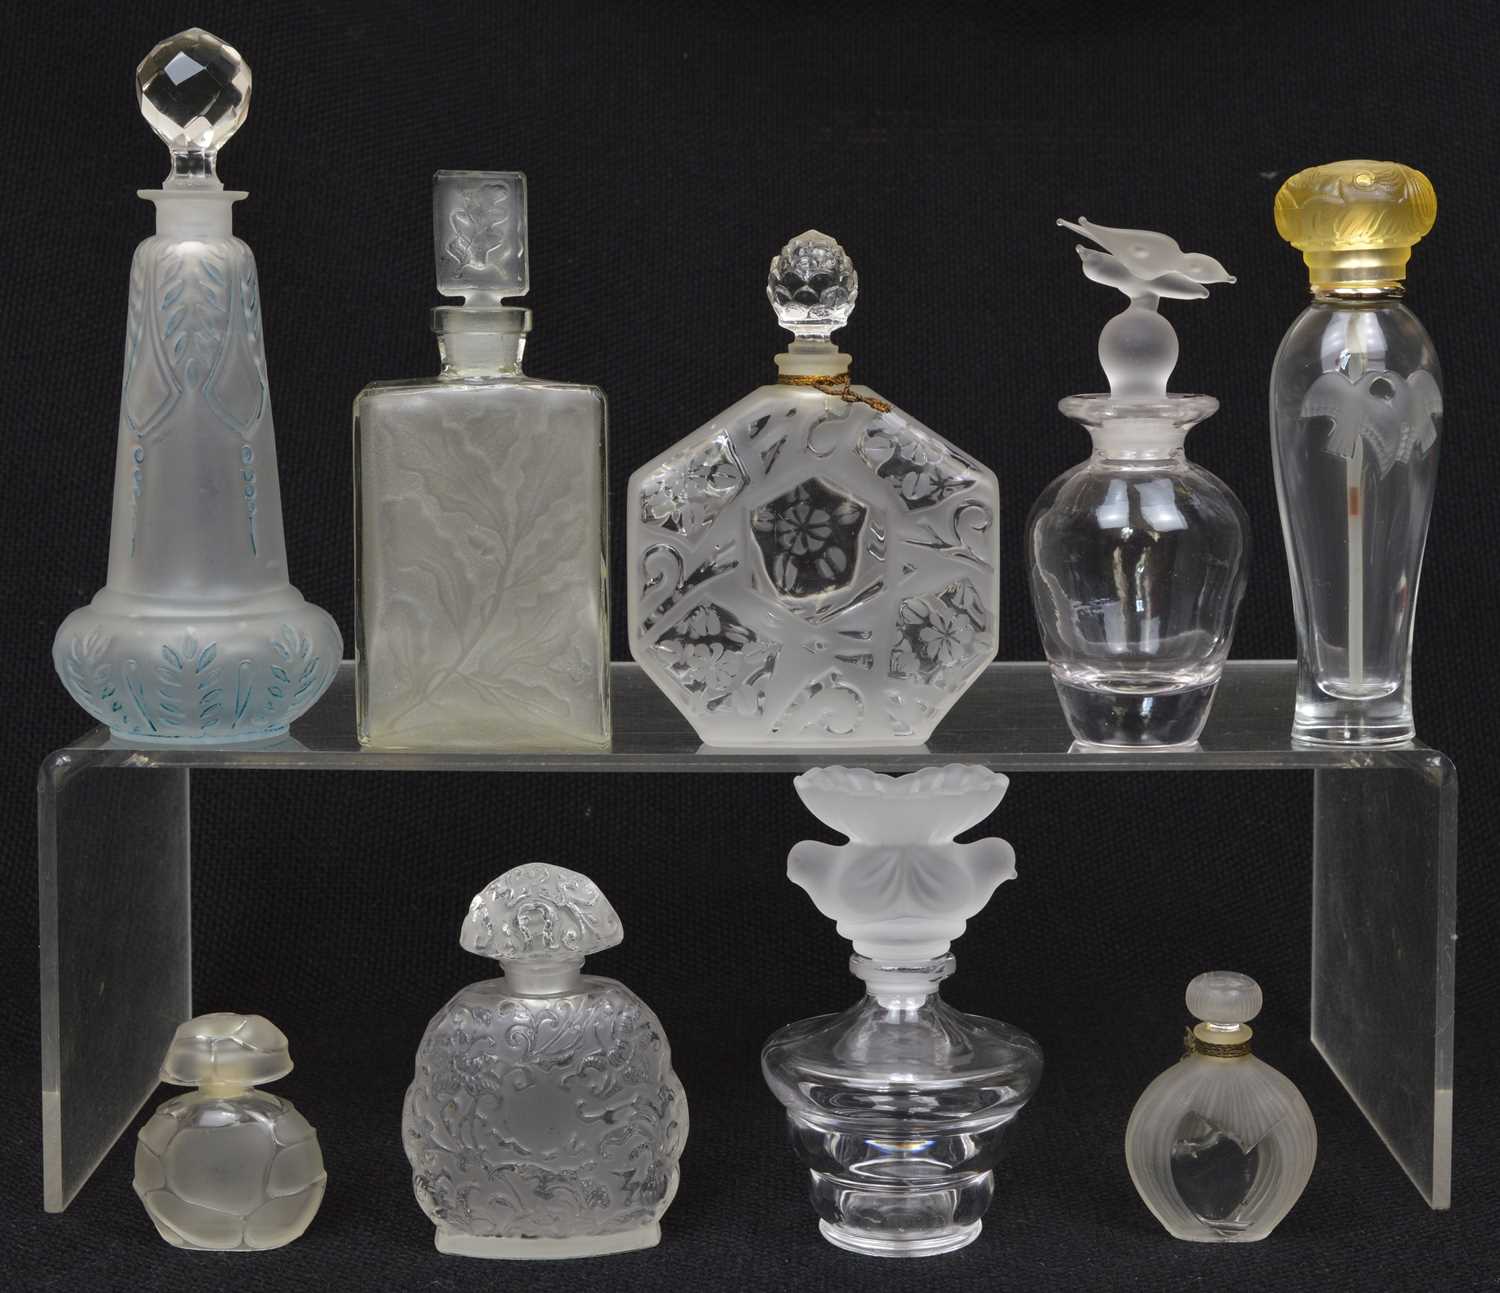 Lot 153 - 9 frosted glass perfume bottles